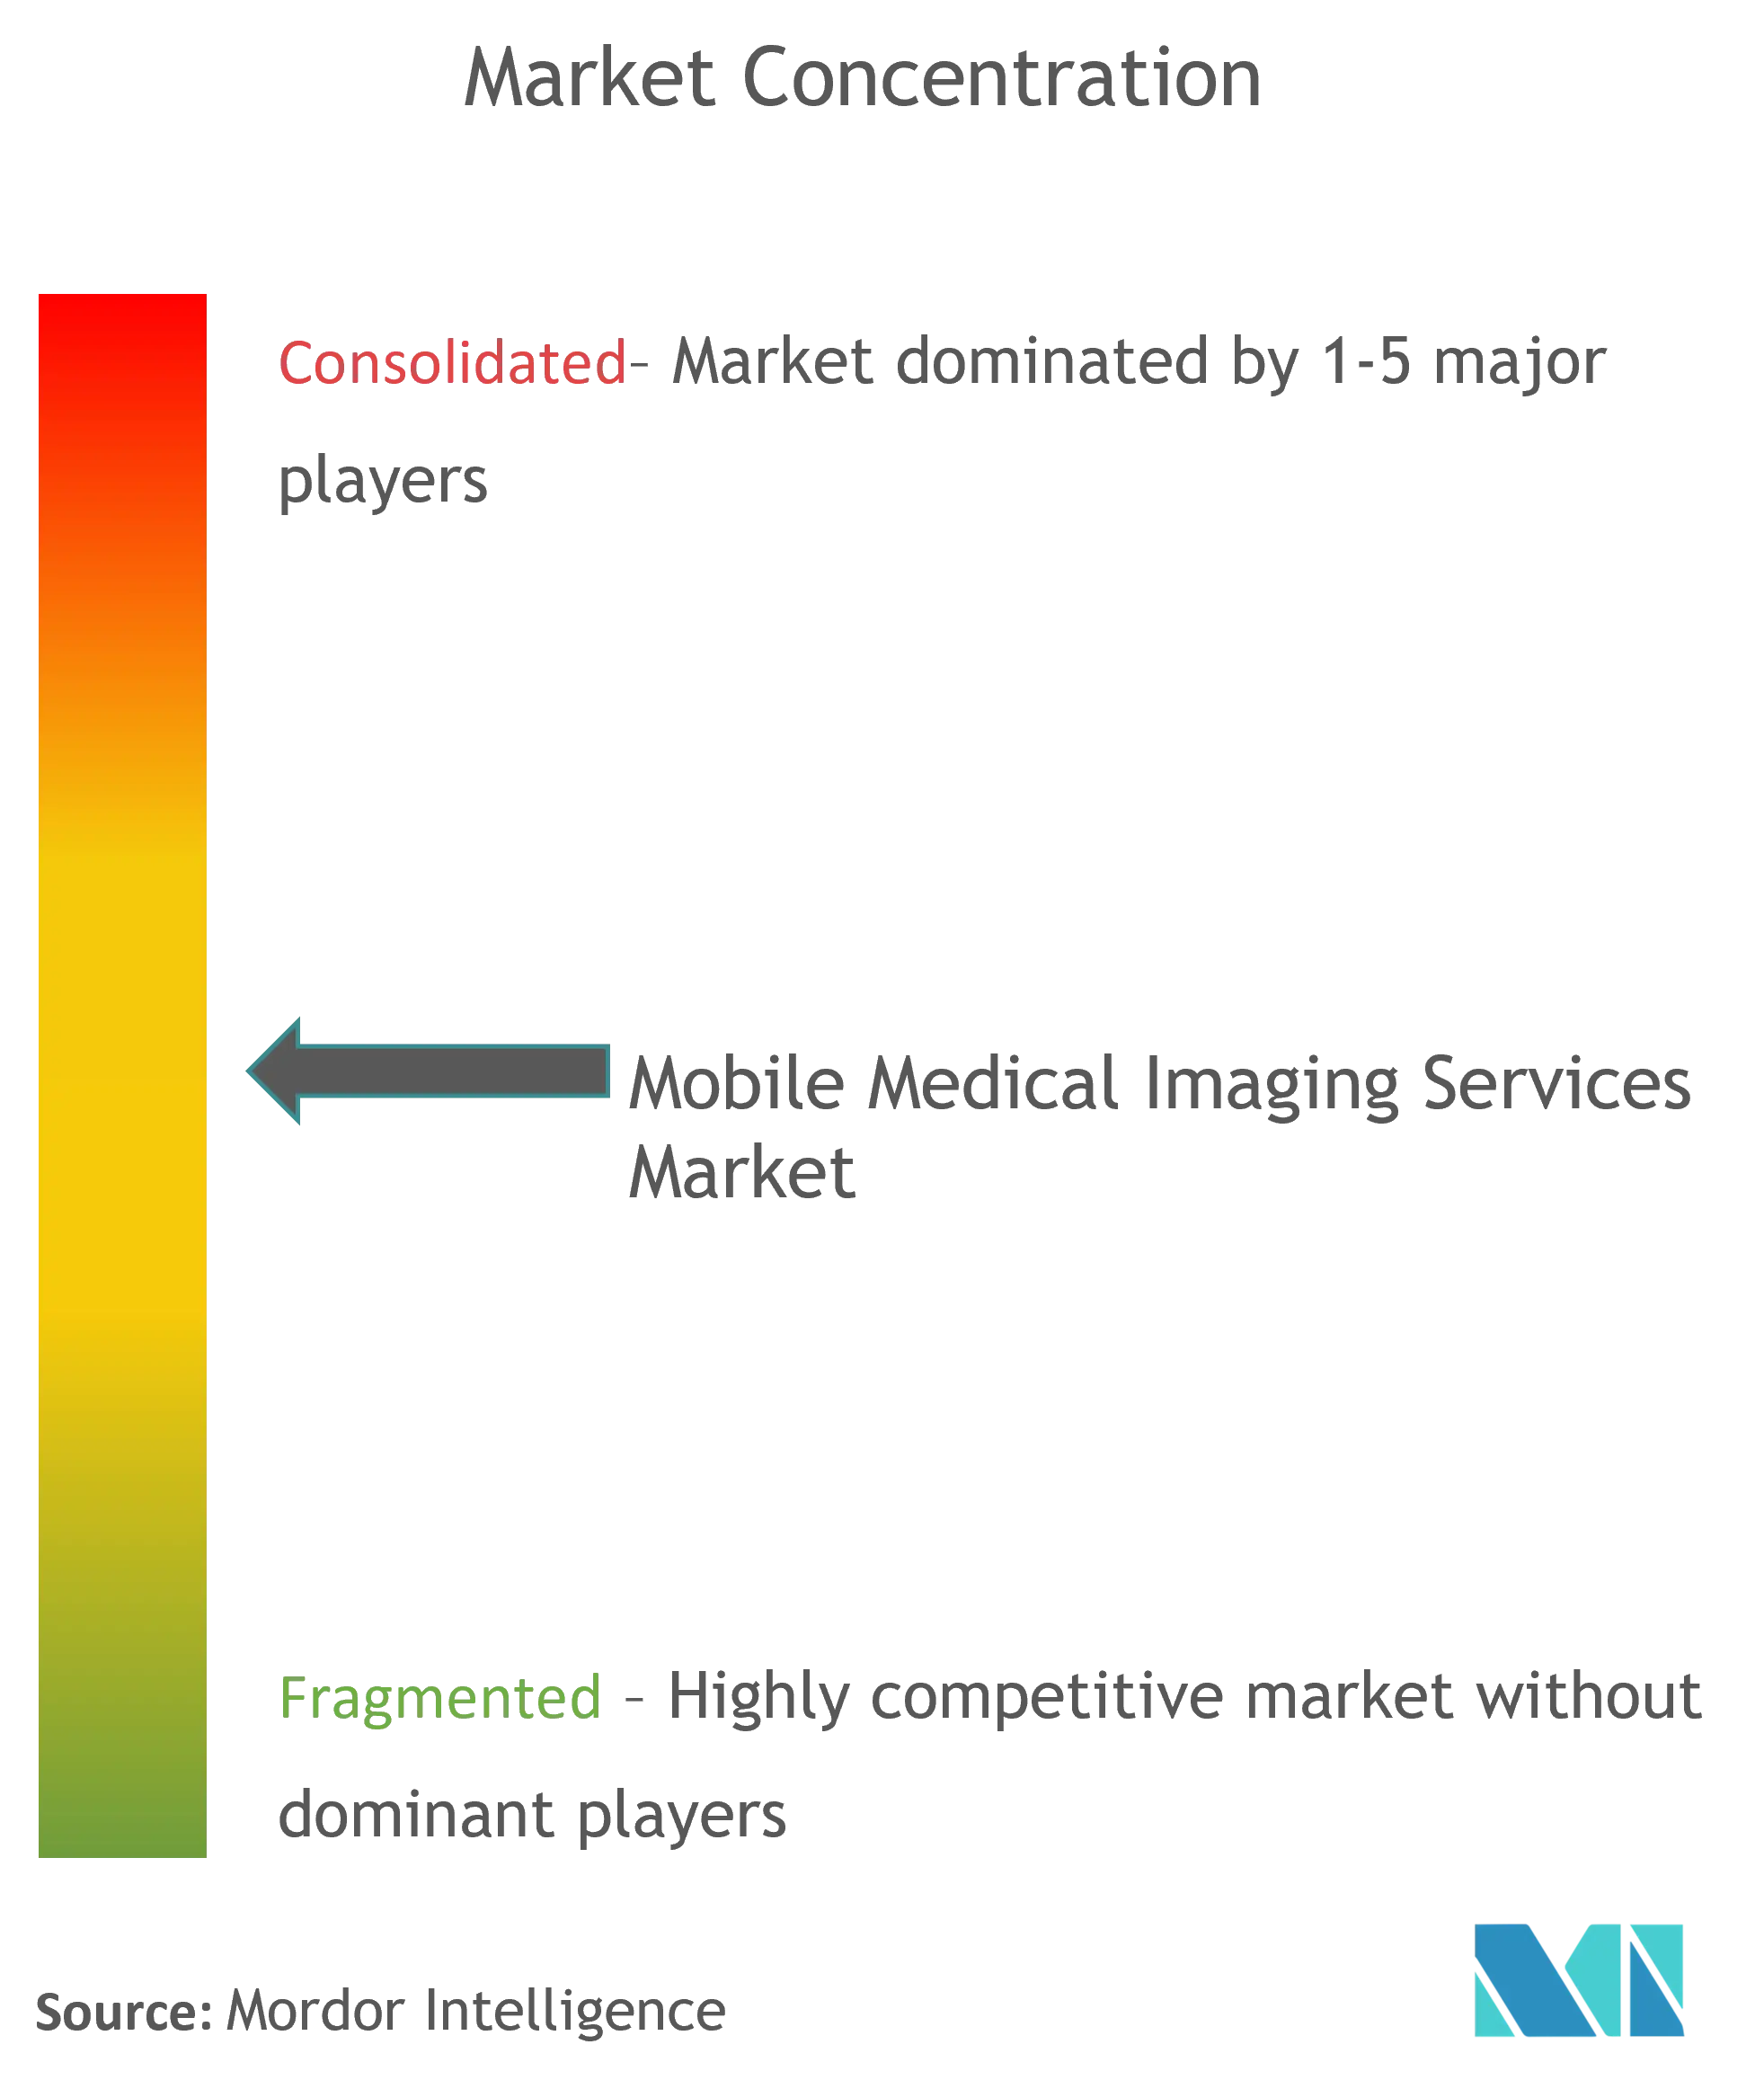 Accurate Imaging Inc, Akumin Inc (Alliance Healthcare Services), Cobalt Imaging Center, DMS Health Technologies, Front Range Mobile Imaging, InHealth Group Limited